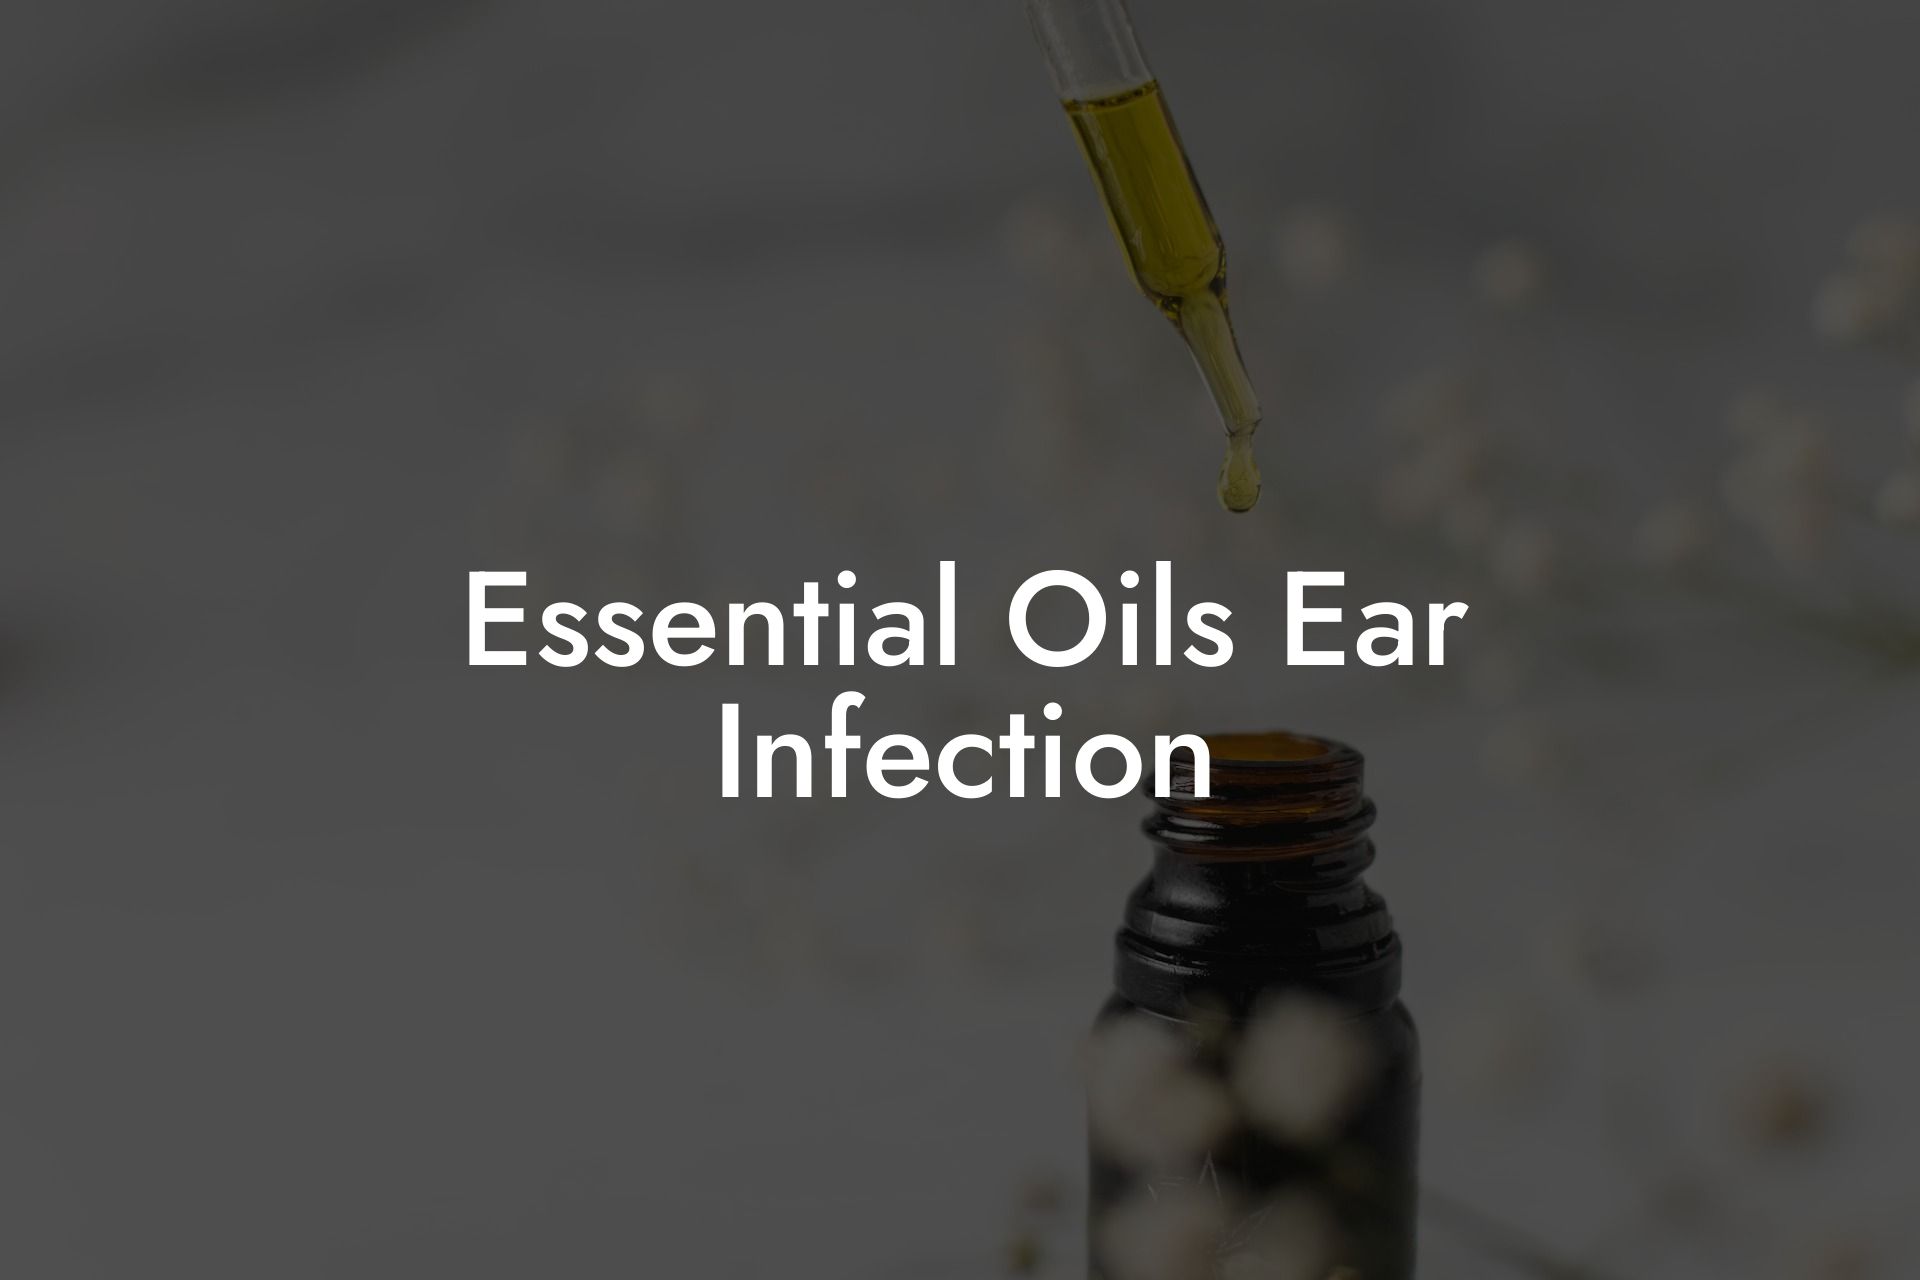 Essential Oils Ear Infection